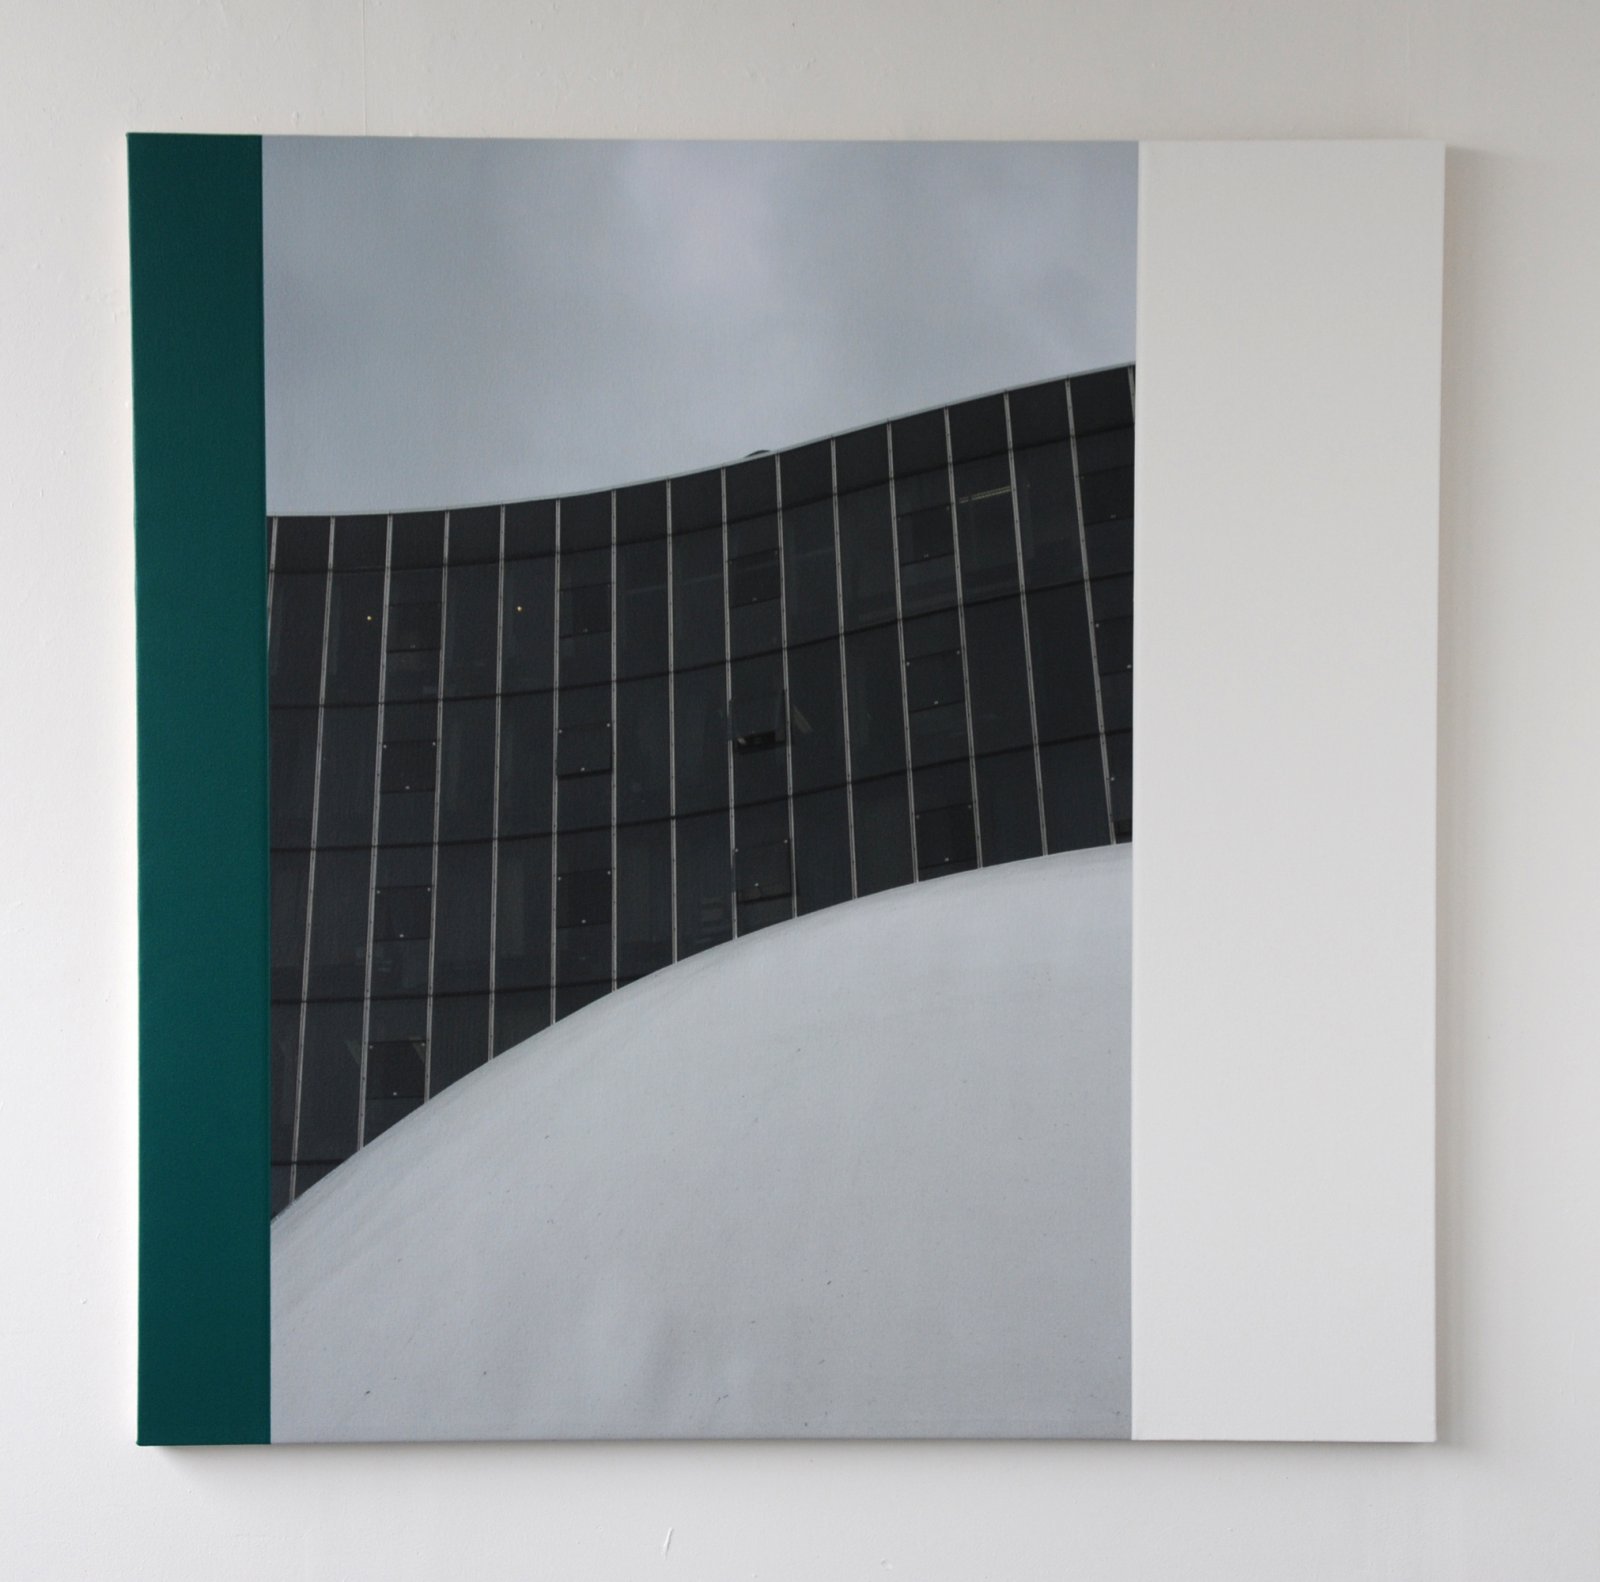 Ian Wallace, PCF Paris Exterior I, 2009, photolaminate with acrylic on canvas, 60 x 60 in. (152 x 152 cm)